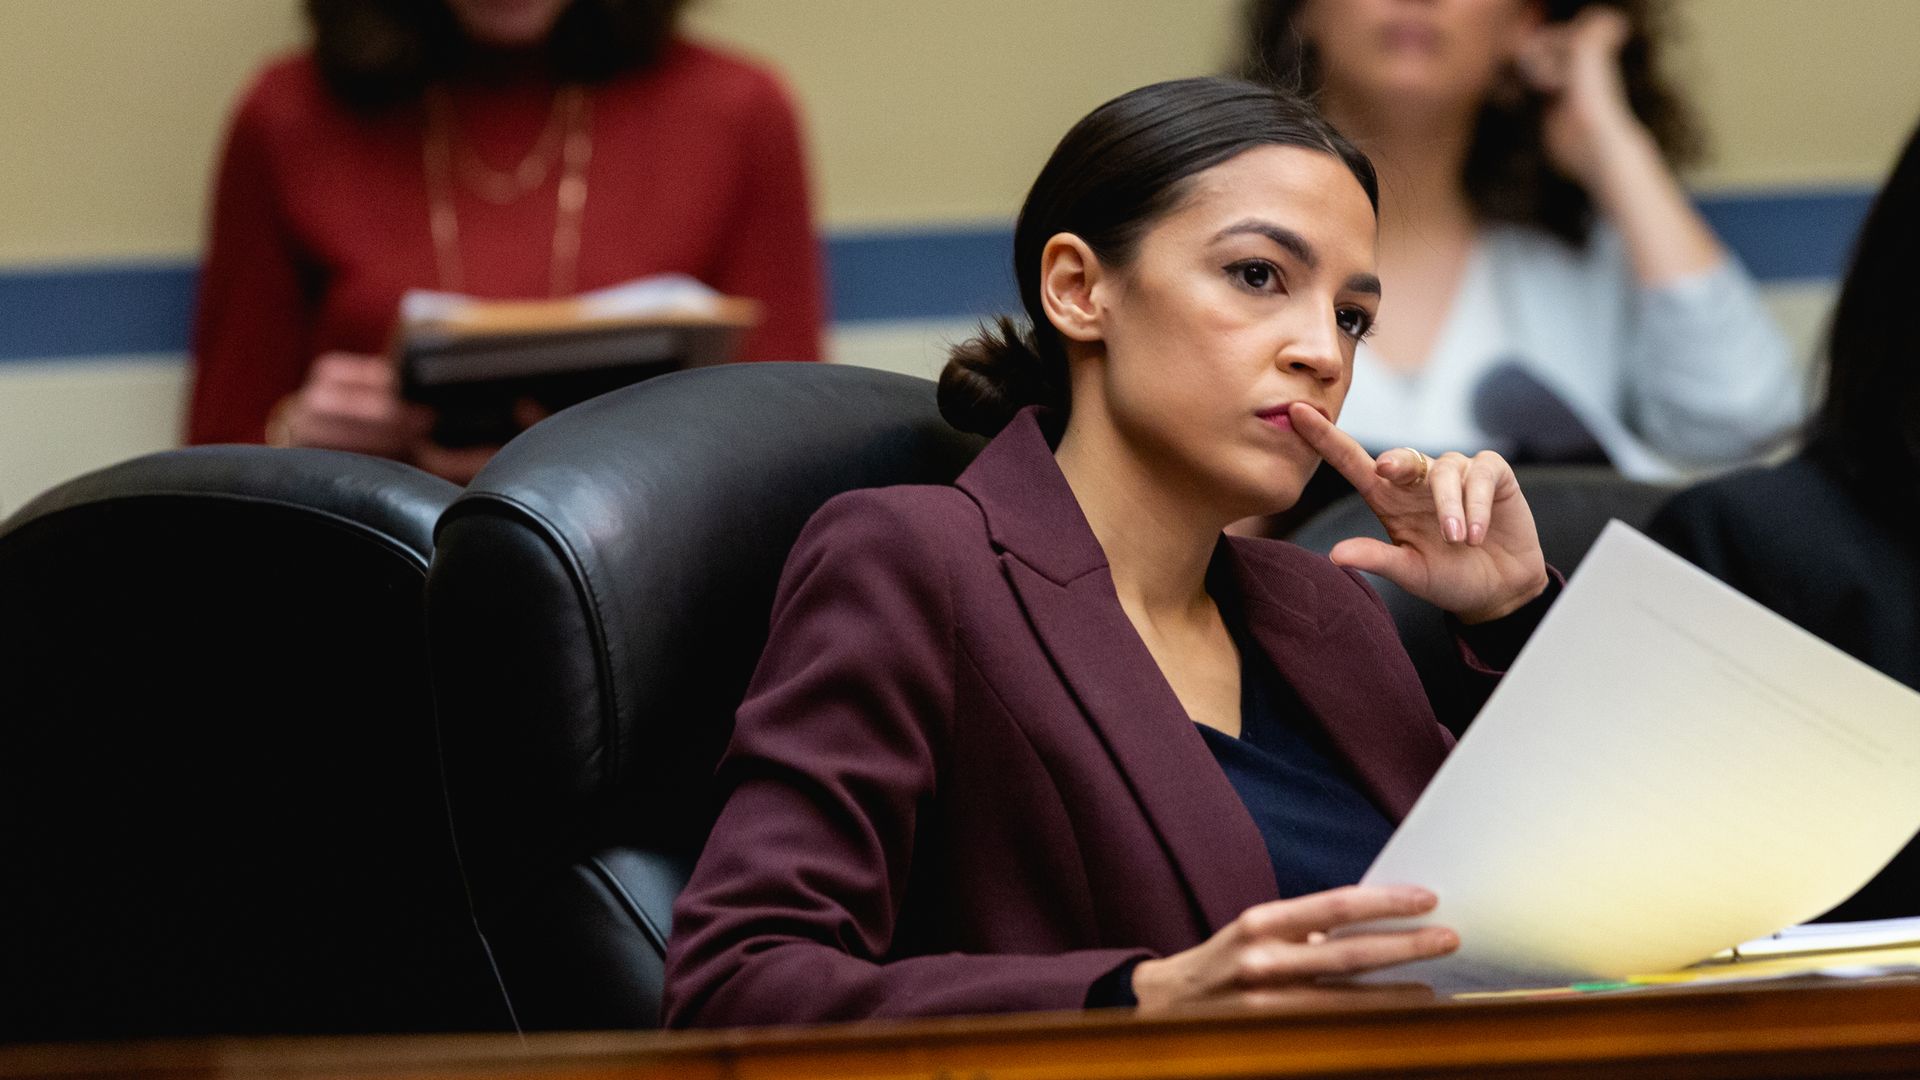 AOC looking intensely forward with her hand touching her mouth. 